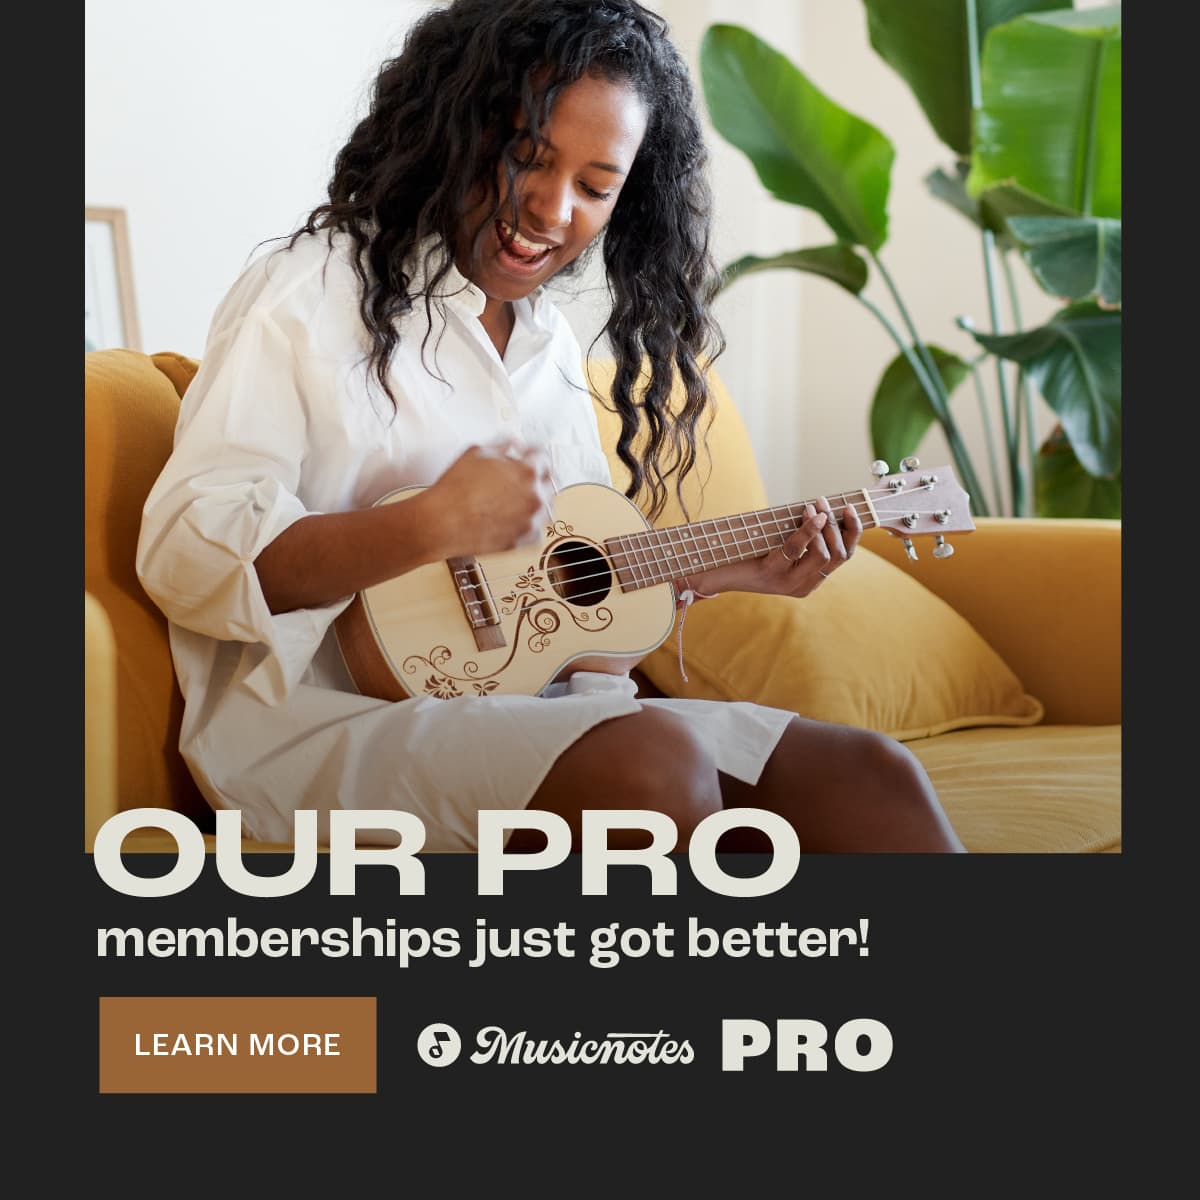 Exciting News! We've upgraded our Pro memberships to offer more value to our Musicnotes community. Enjoy increased discounts, more FREE Musicnotes Editions, and a simplified pricing structure. Click here to learn more: musicnotes.com/l/proplan-twit… #Musicnotes